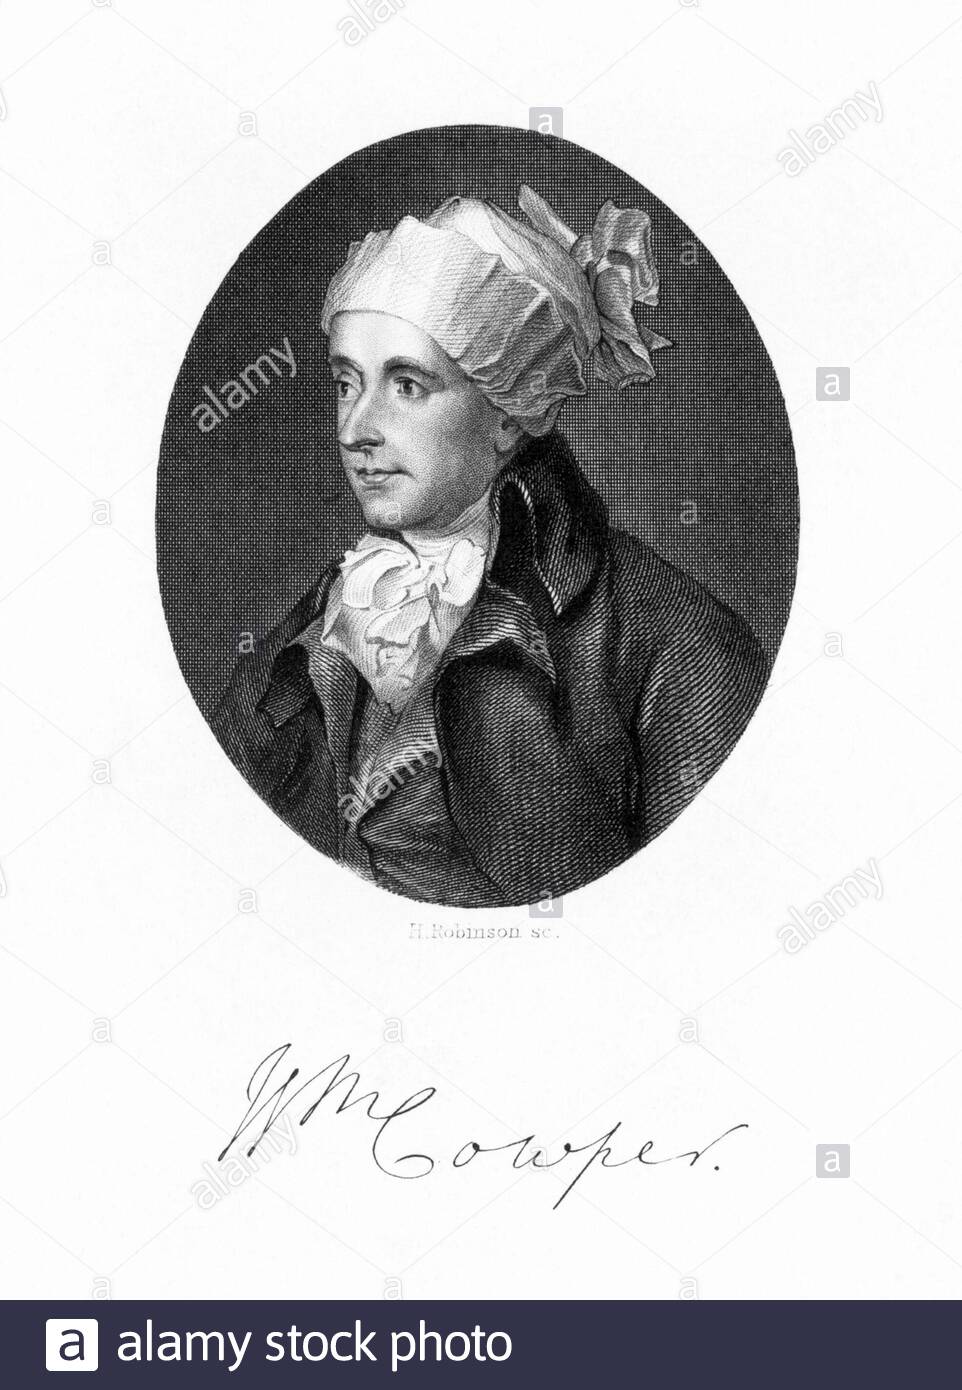 William Cowper portrait, 1731 – 1800, was an English poet, vintage illustration from 1830 Stock Photo